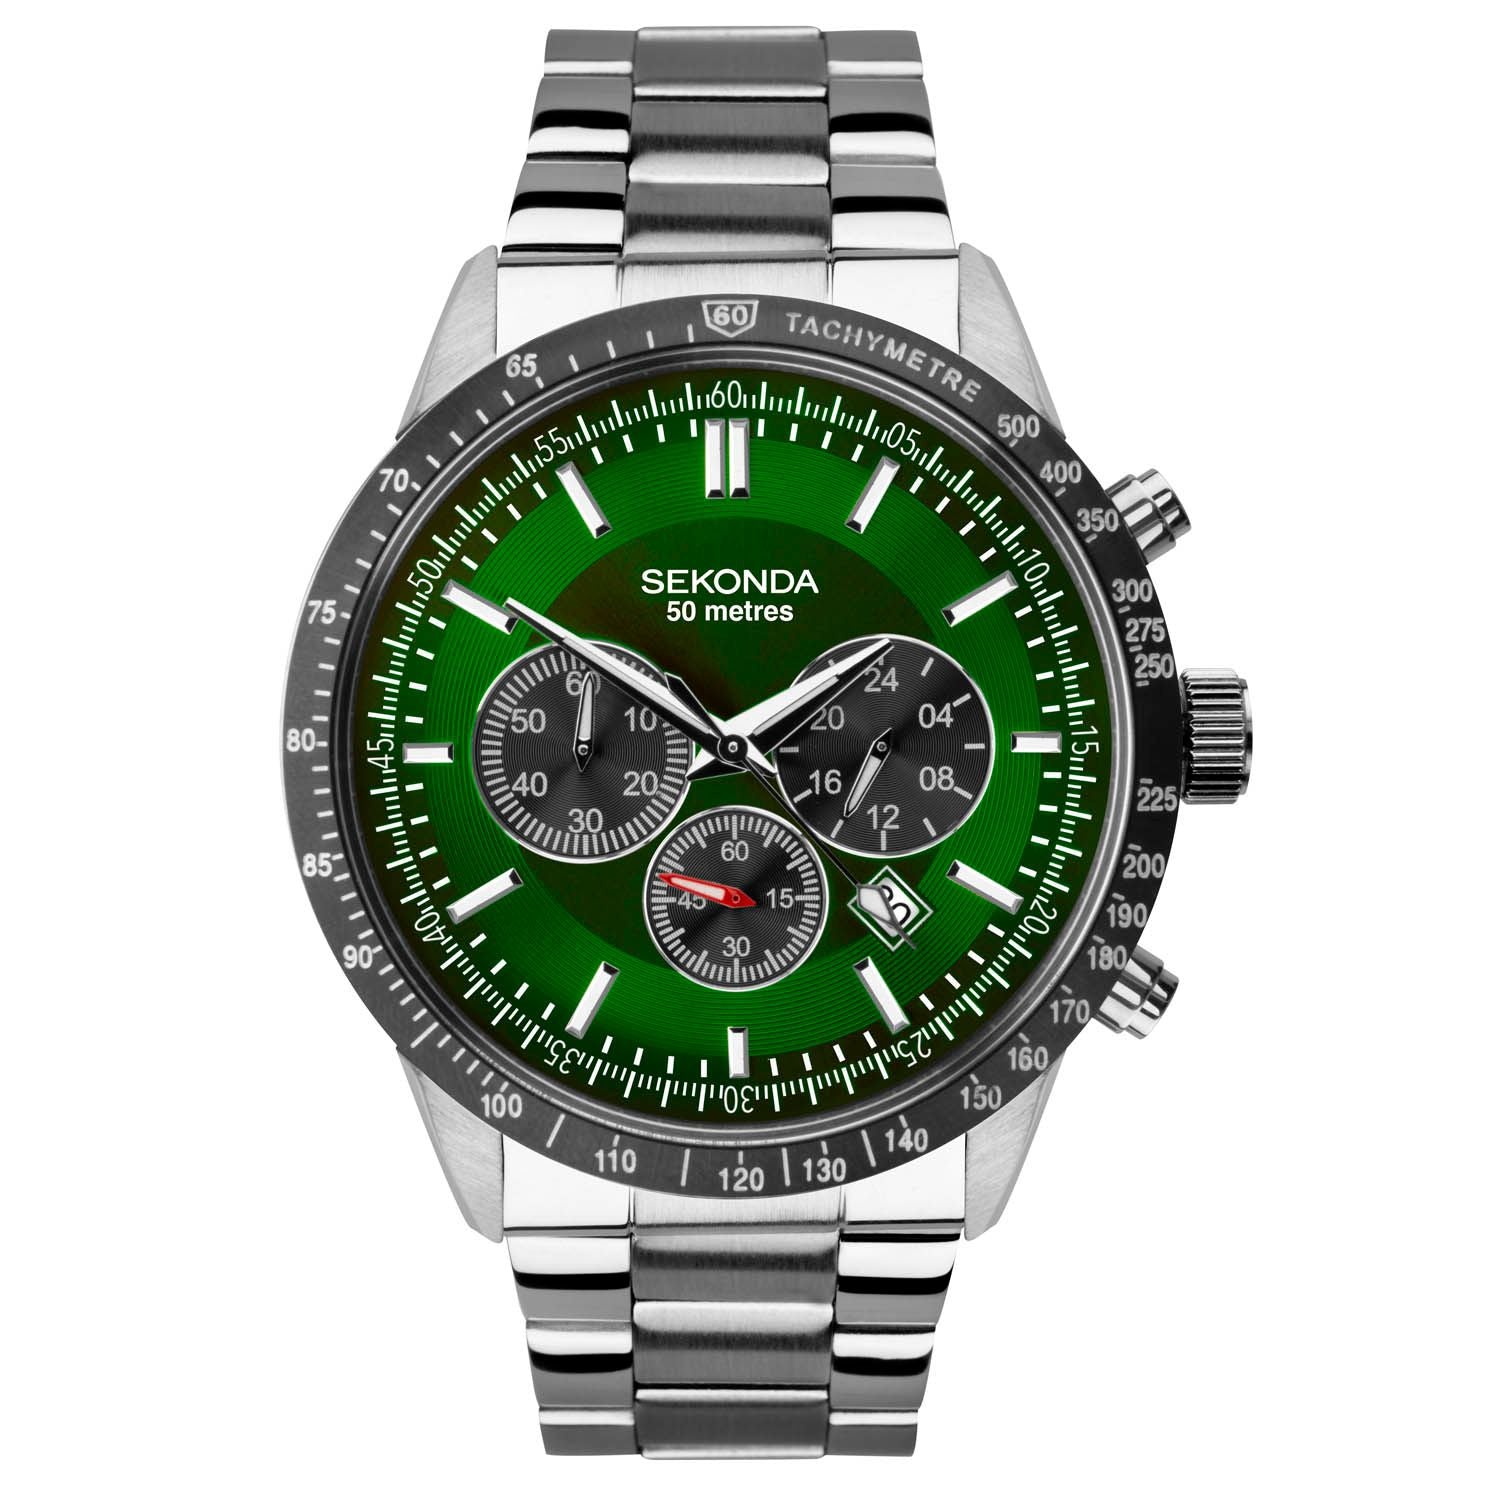 Sekonda Men's Chronograph Watch Silver Case & Stainless Steel Bracelet with Green Dial